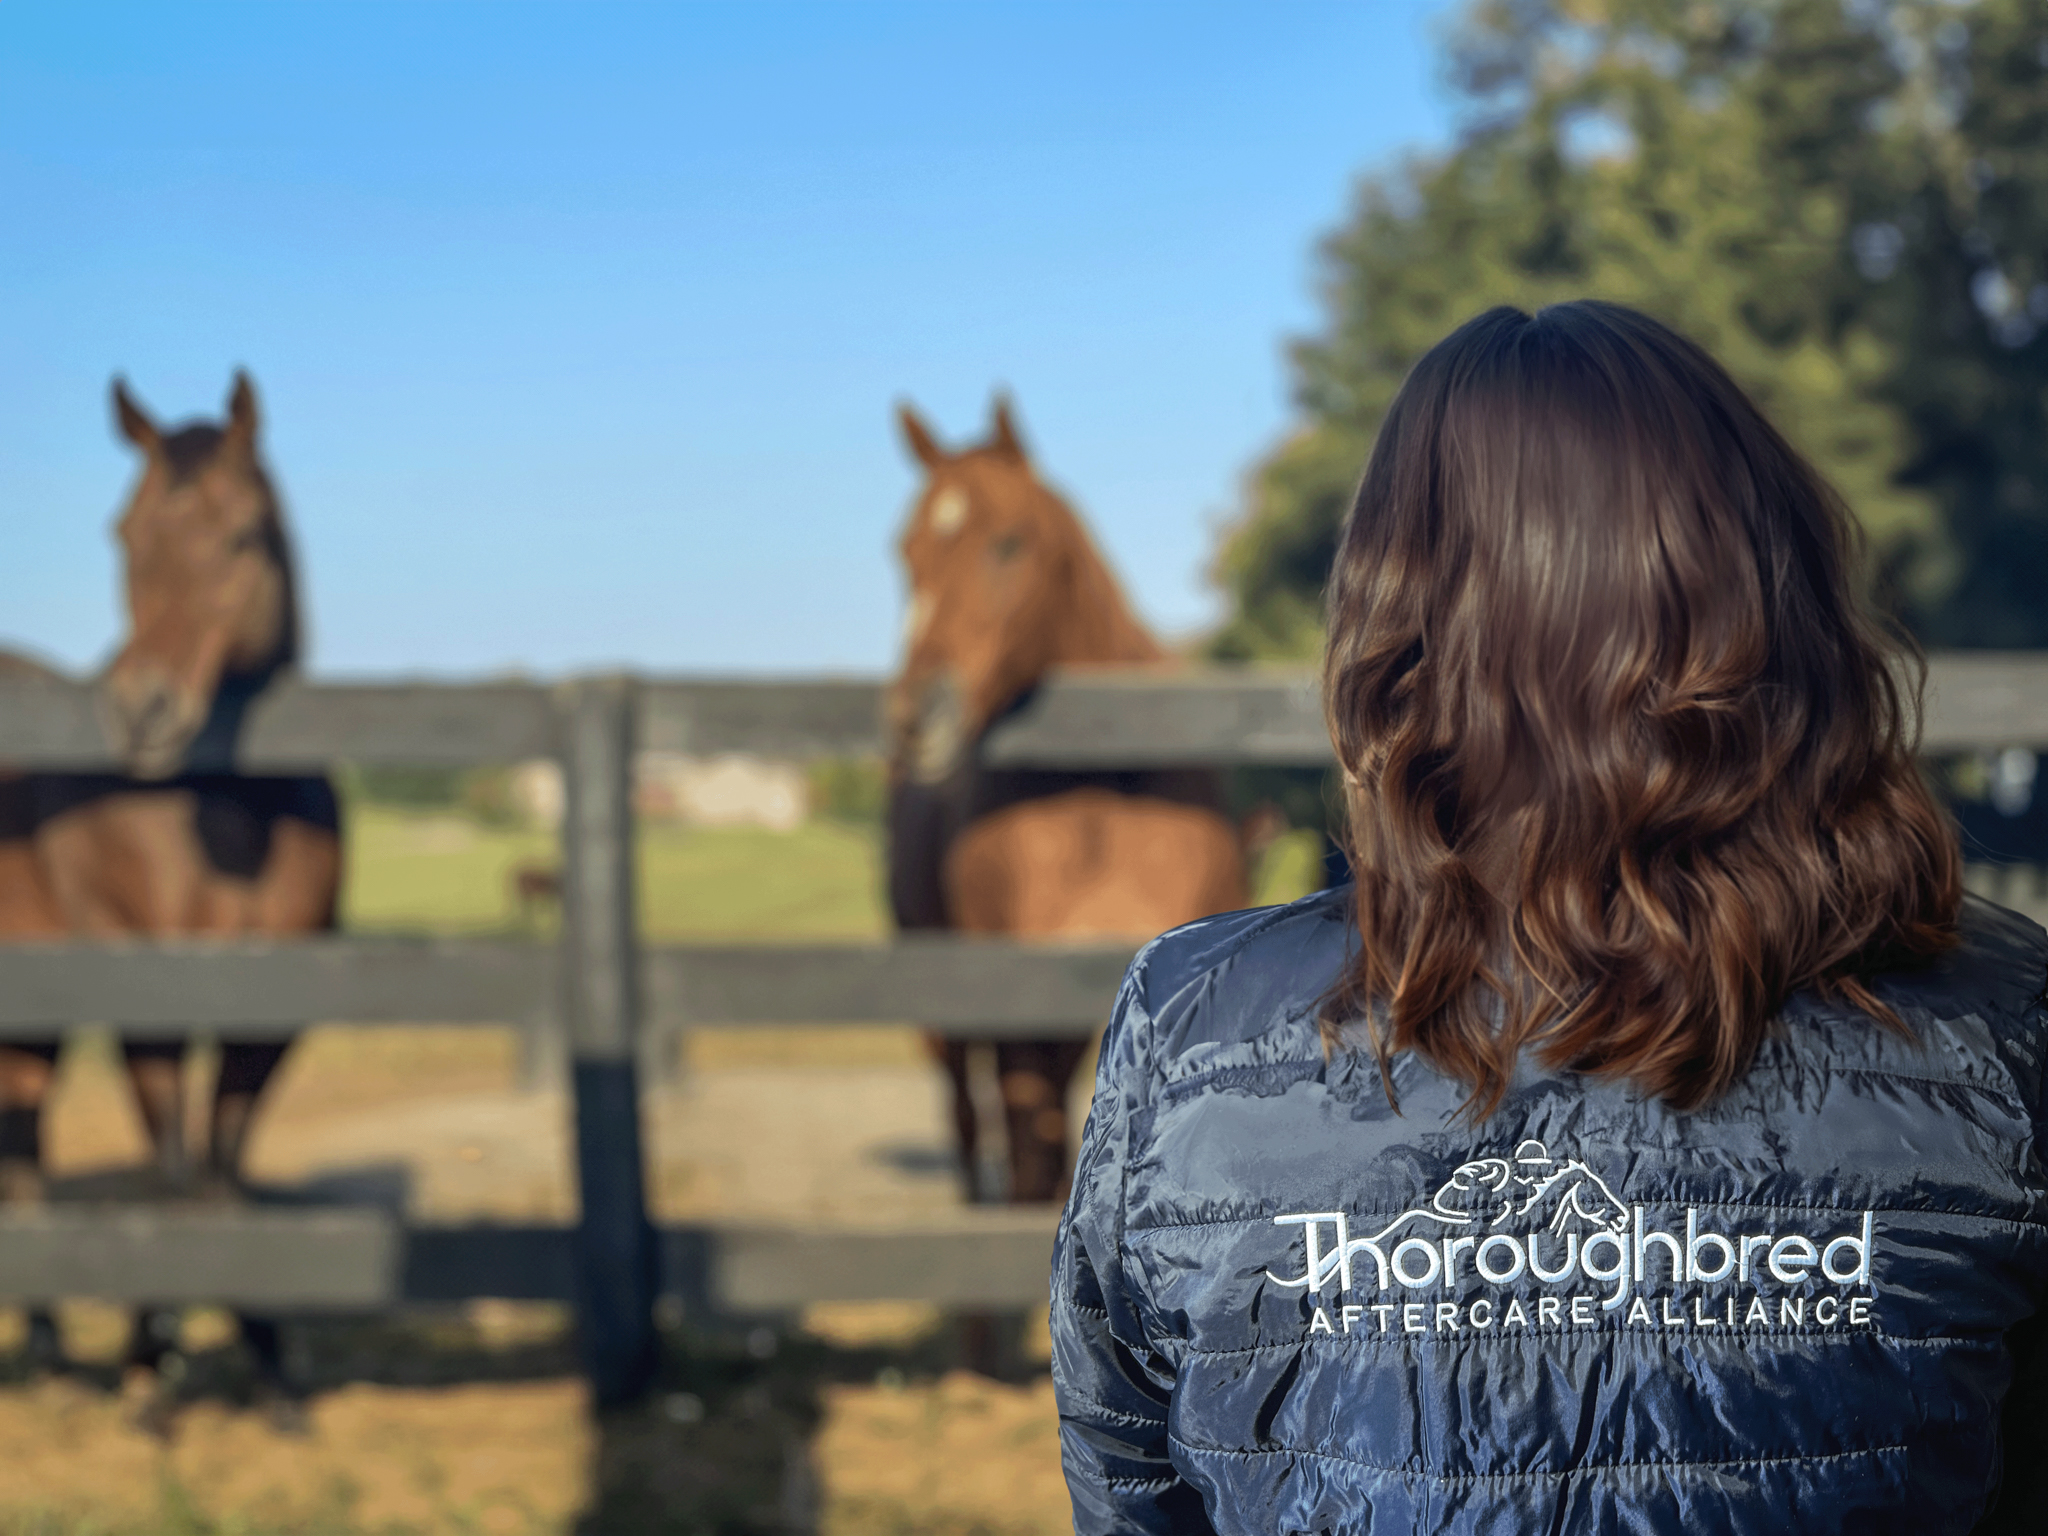 New Directors Elected to Thoroughbred Aftercare Alliance Board